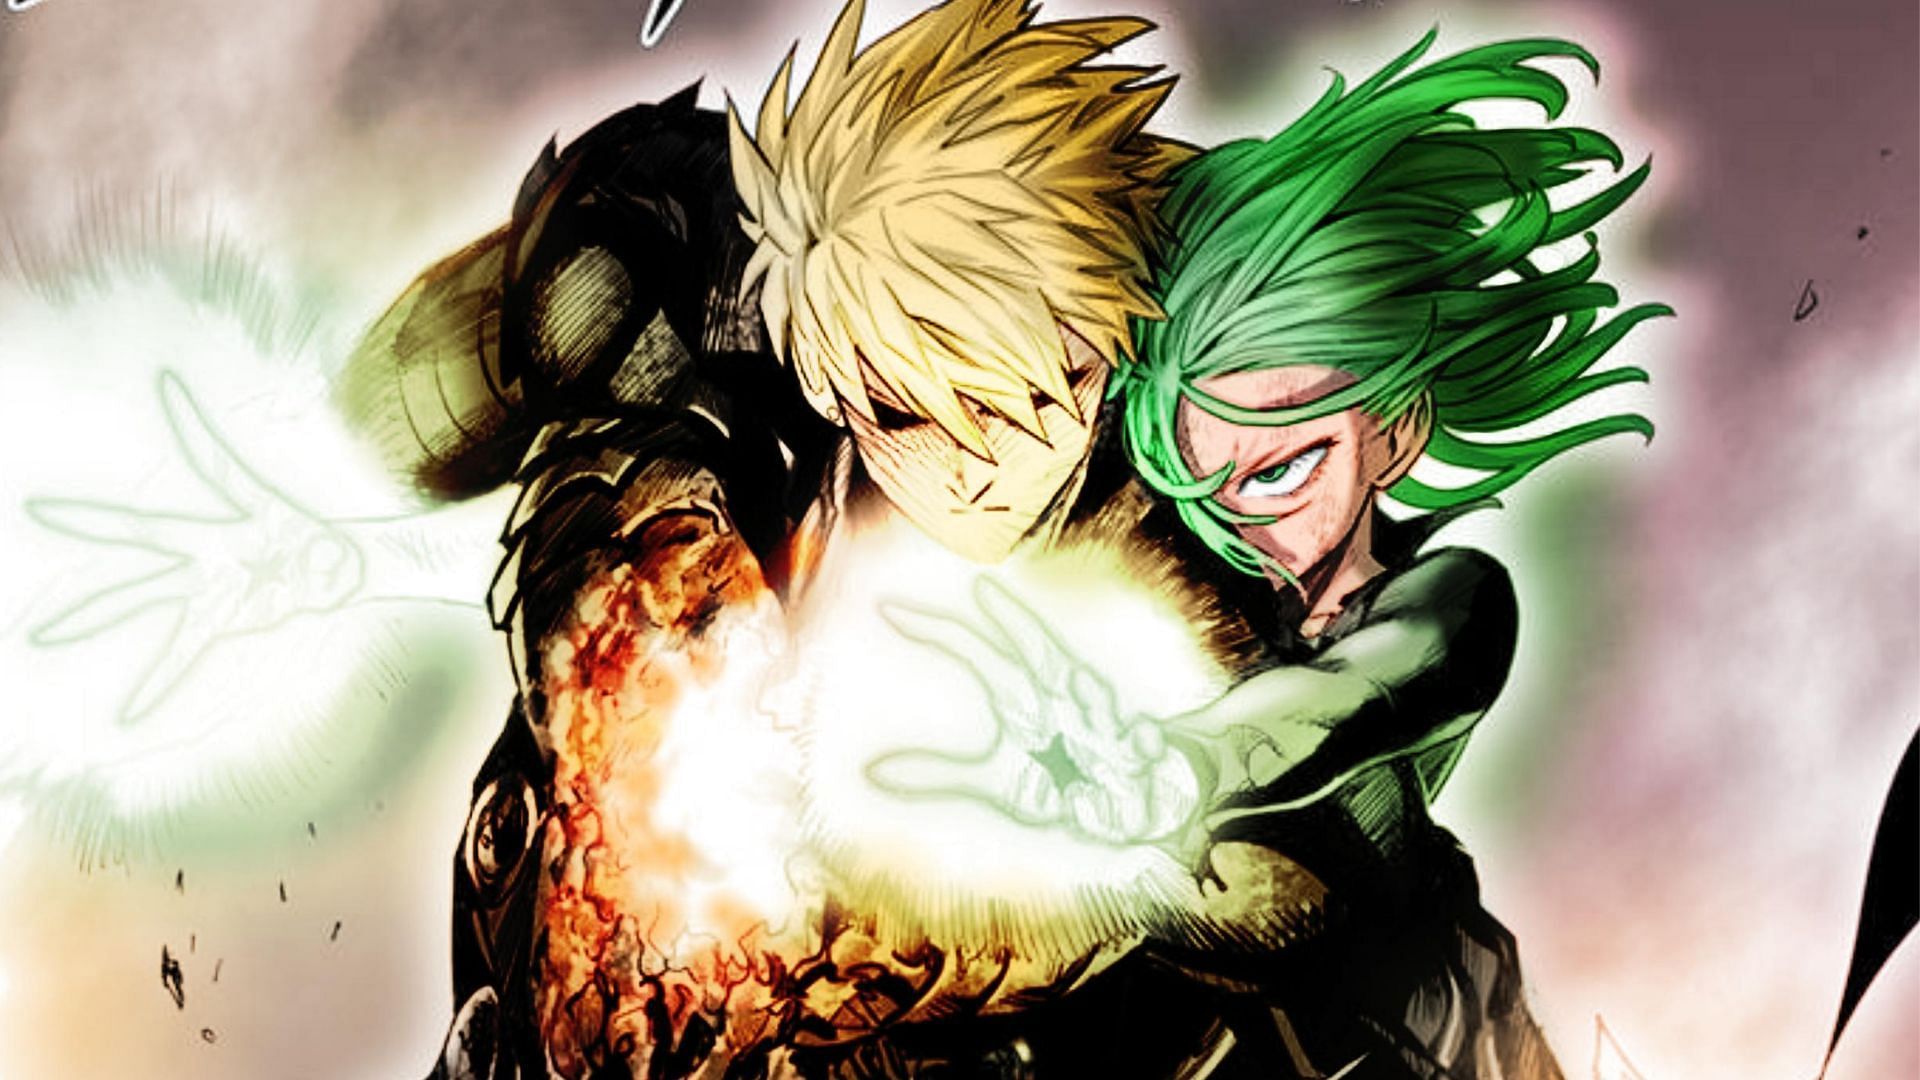 Genos and Tatsumaki as seen in One Punch Man